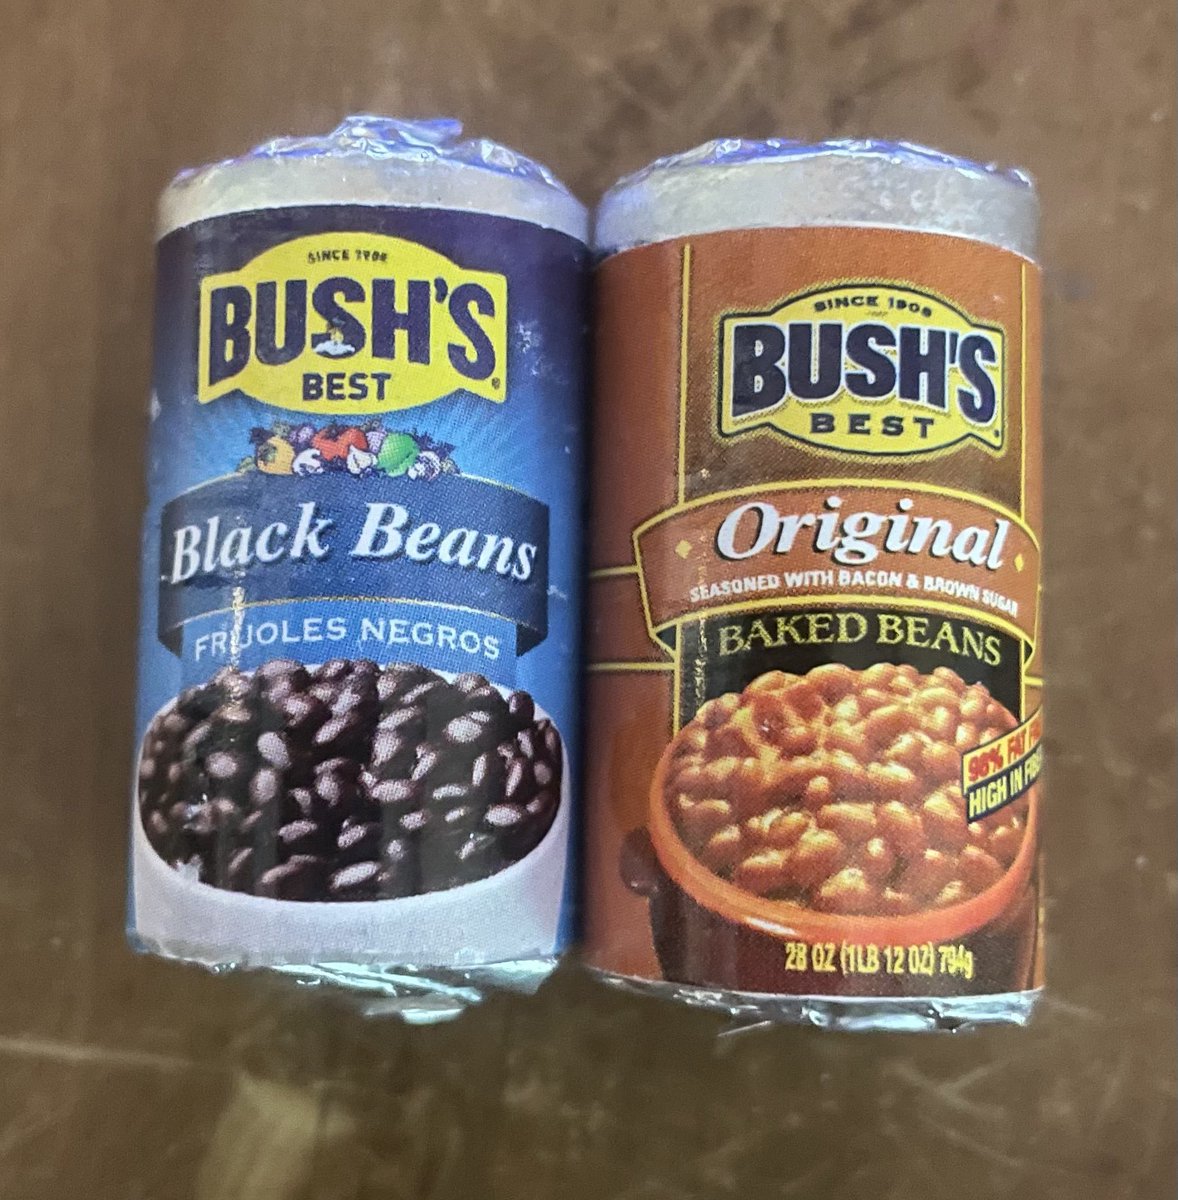 I can’t wait to try out my beans owo